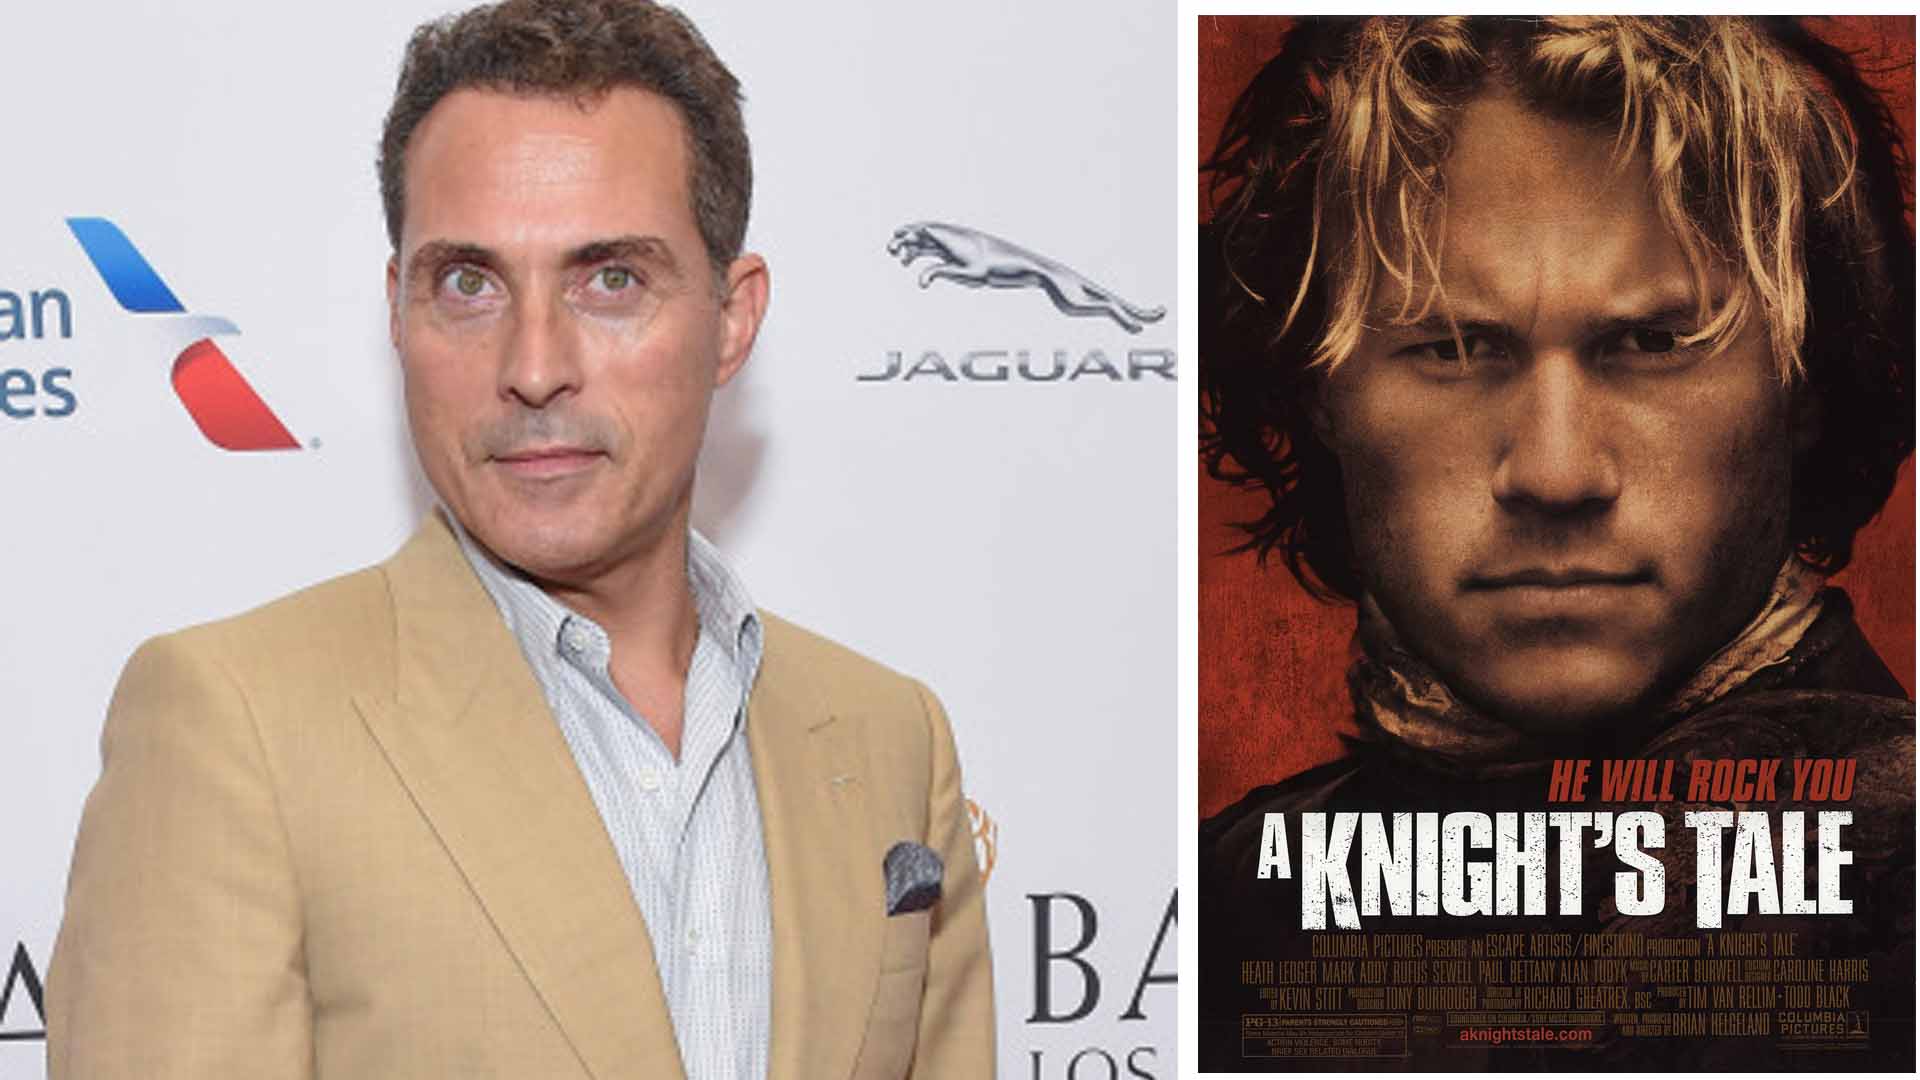 A Knight's Tale At 20: Rufus Sewell Said He And Heath Ledger Had "A Riotous Good Time"